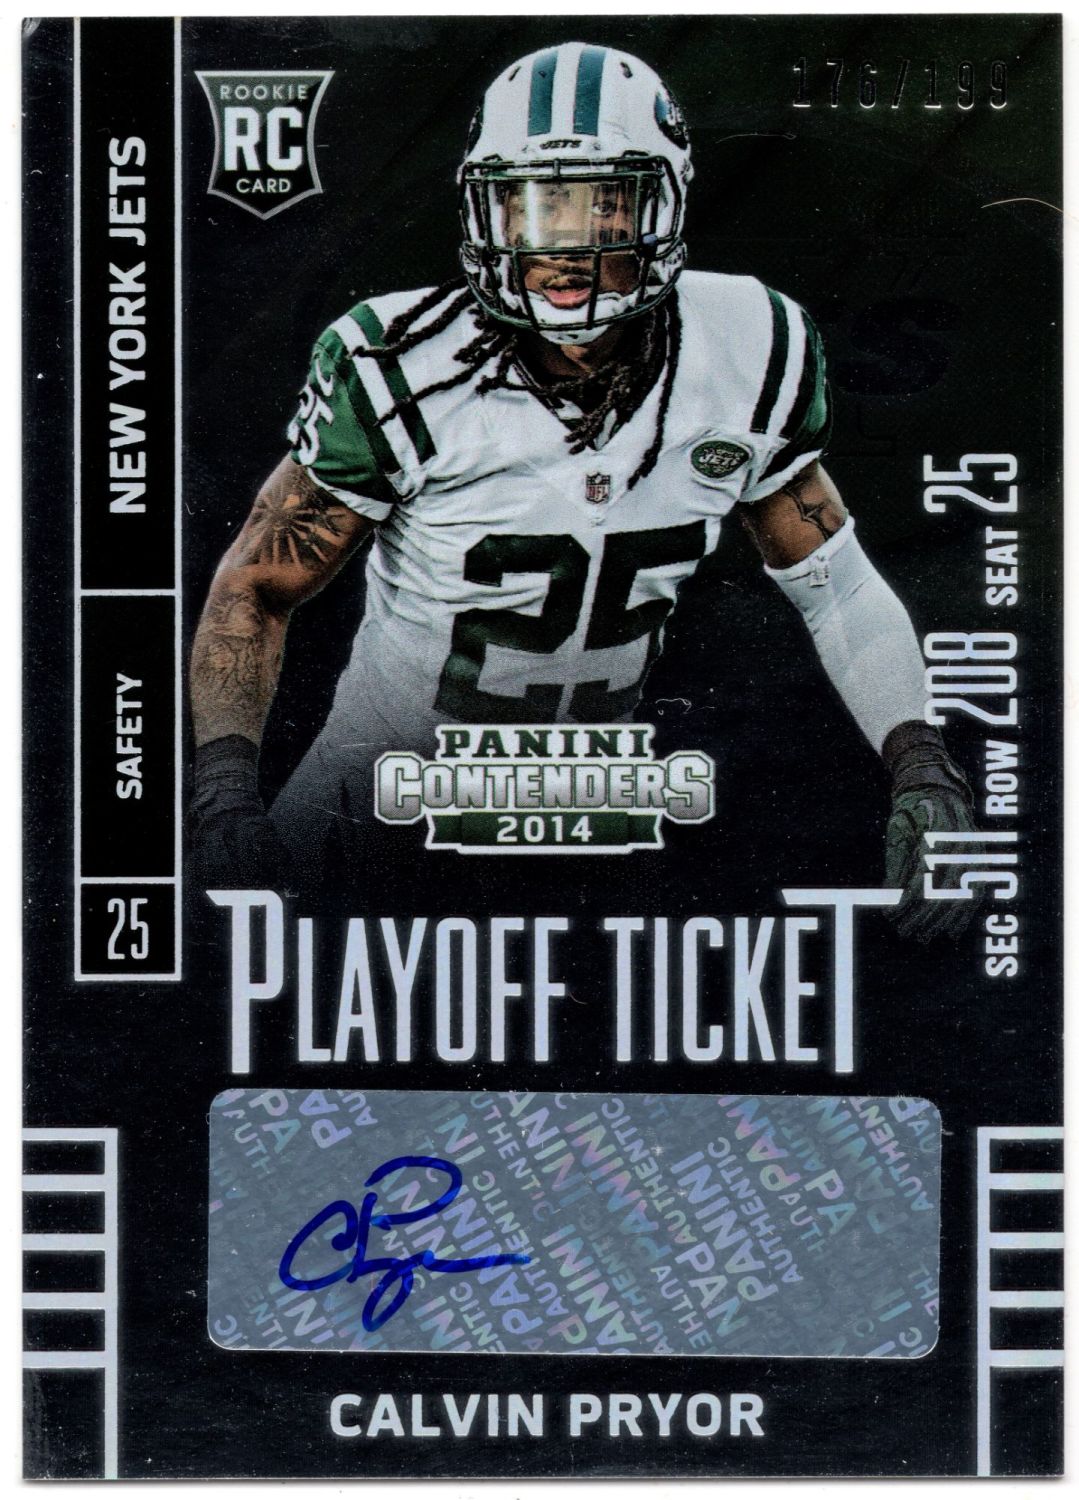 2014 Panini Contenders CALVIN PRYOR Rookie Playoff Ticket Autograph /199 #1